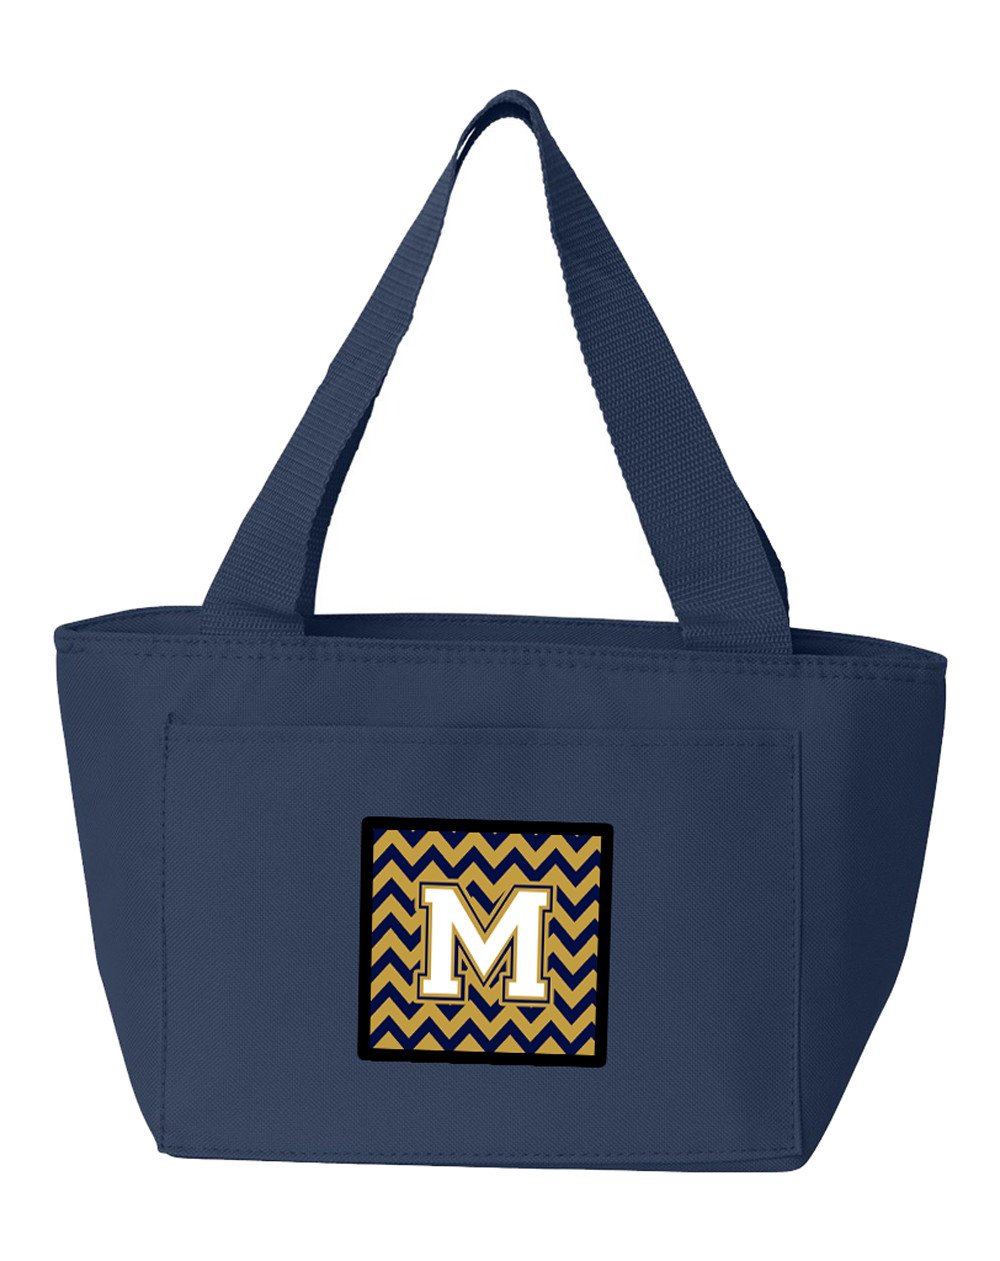 Letter M Chevron Navy Blue and Gold Lunch Bag CJ1057-MNA-8808 by Caroline's Treasures